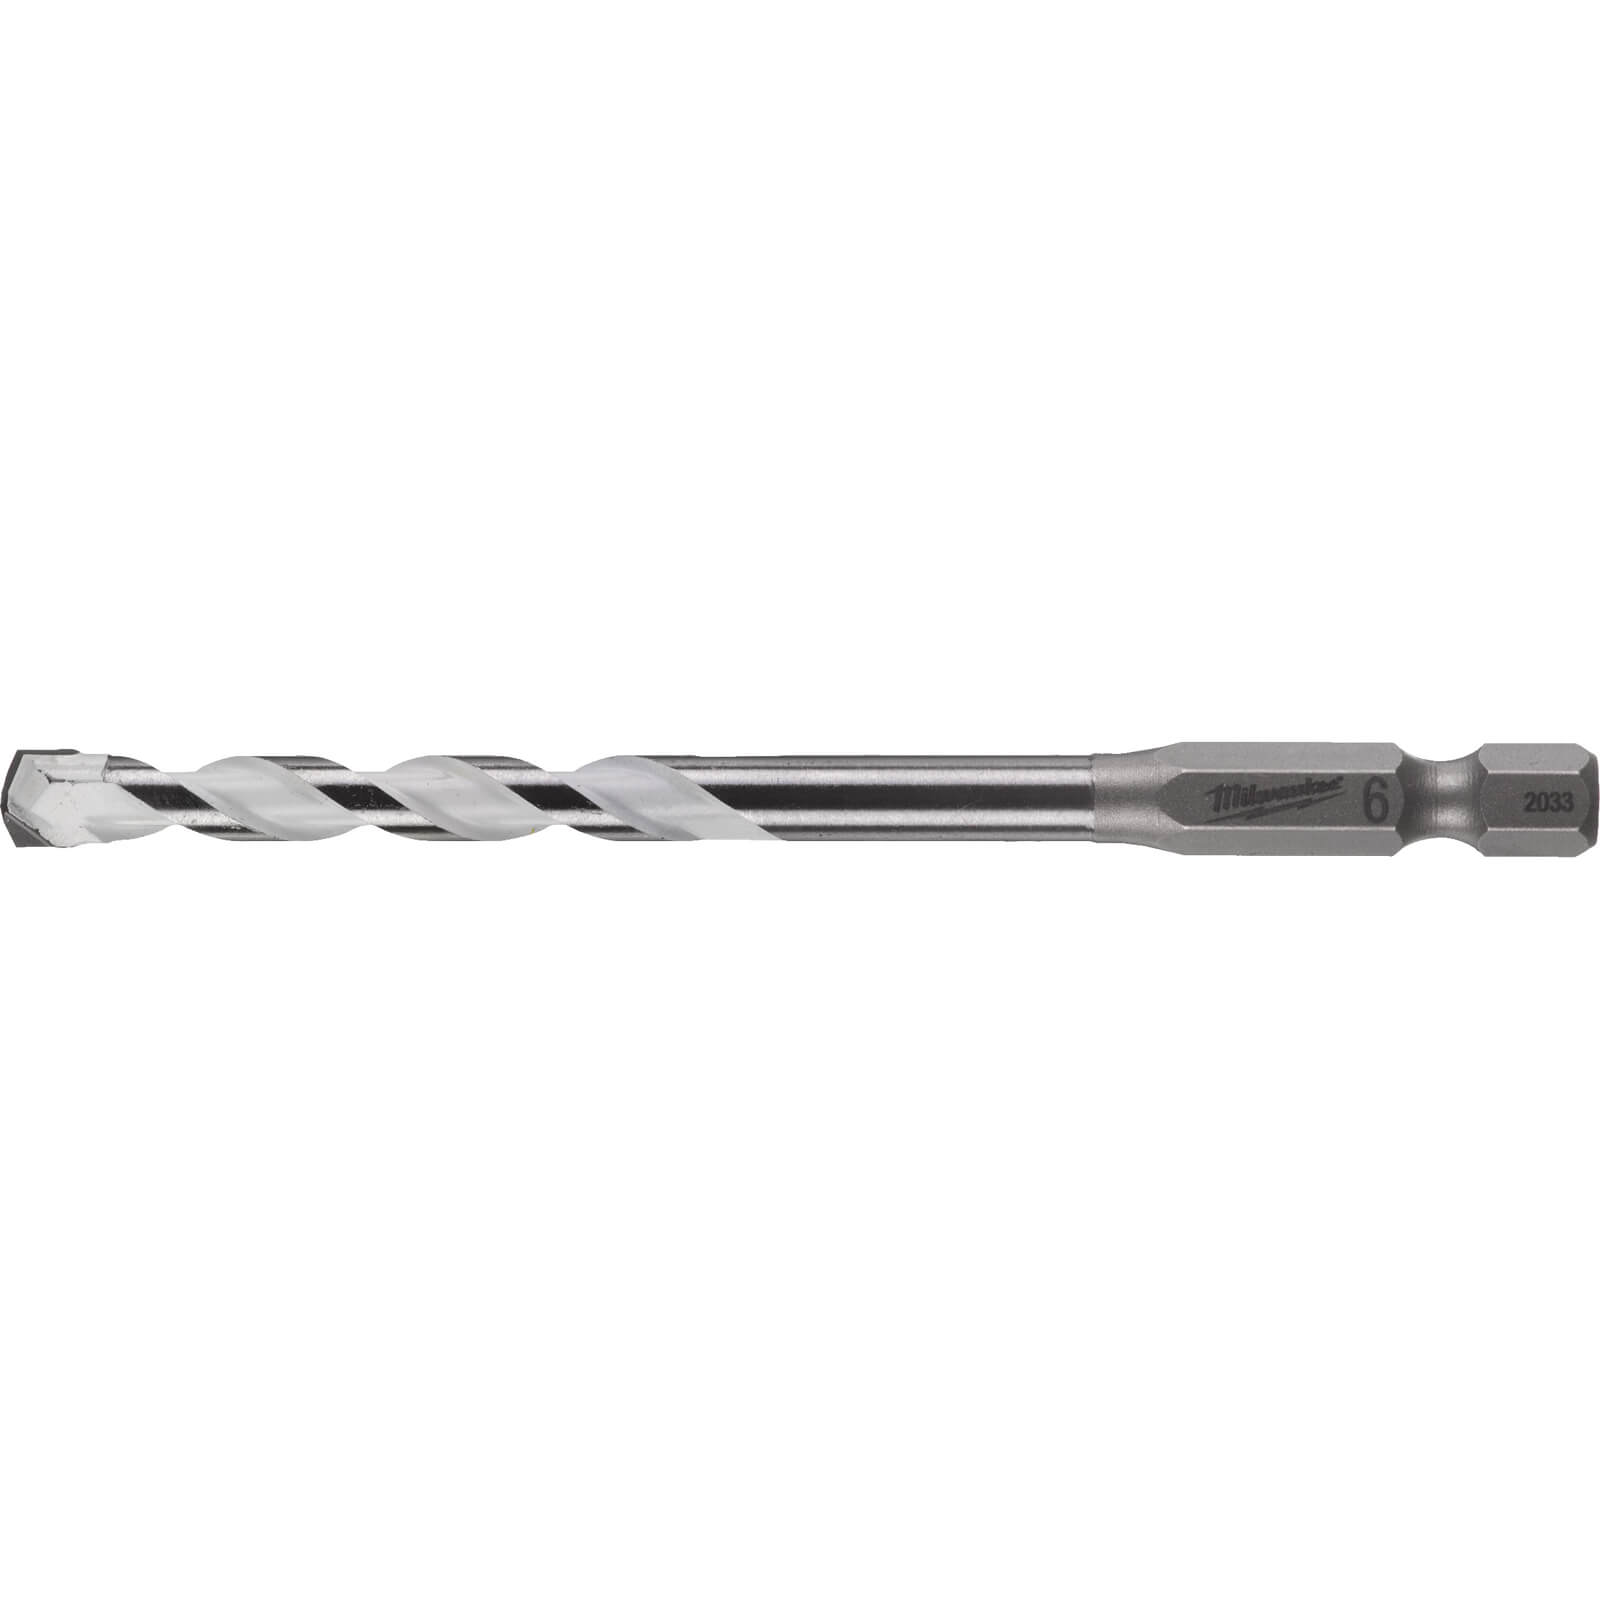 Photos - Drill Bit Milwaukee Multi Material Drill 6mm 100mm Pack of 1 4932471096 